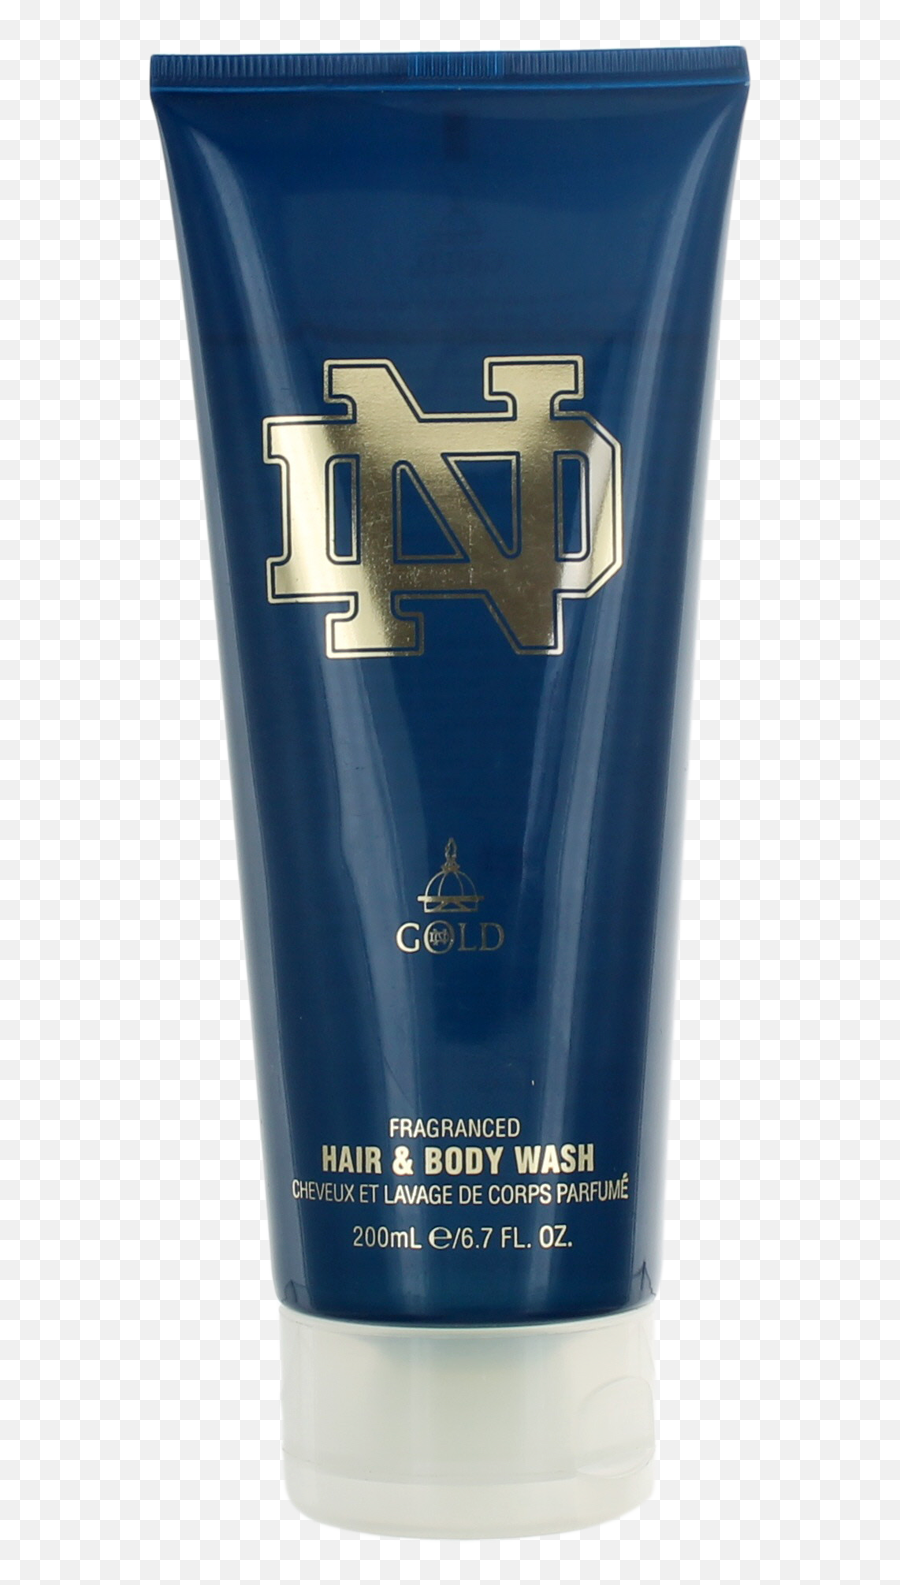 Gold By Notre Dame For Men Hair New Body Store 67oz Amp Wash Emoji,Buty Rasasi Emotion